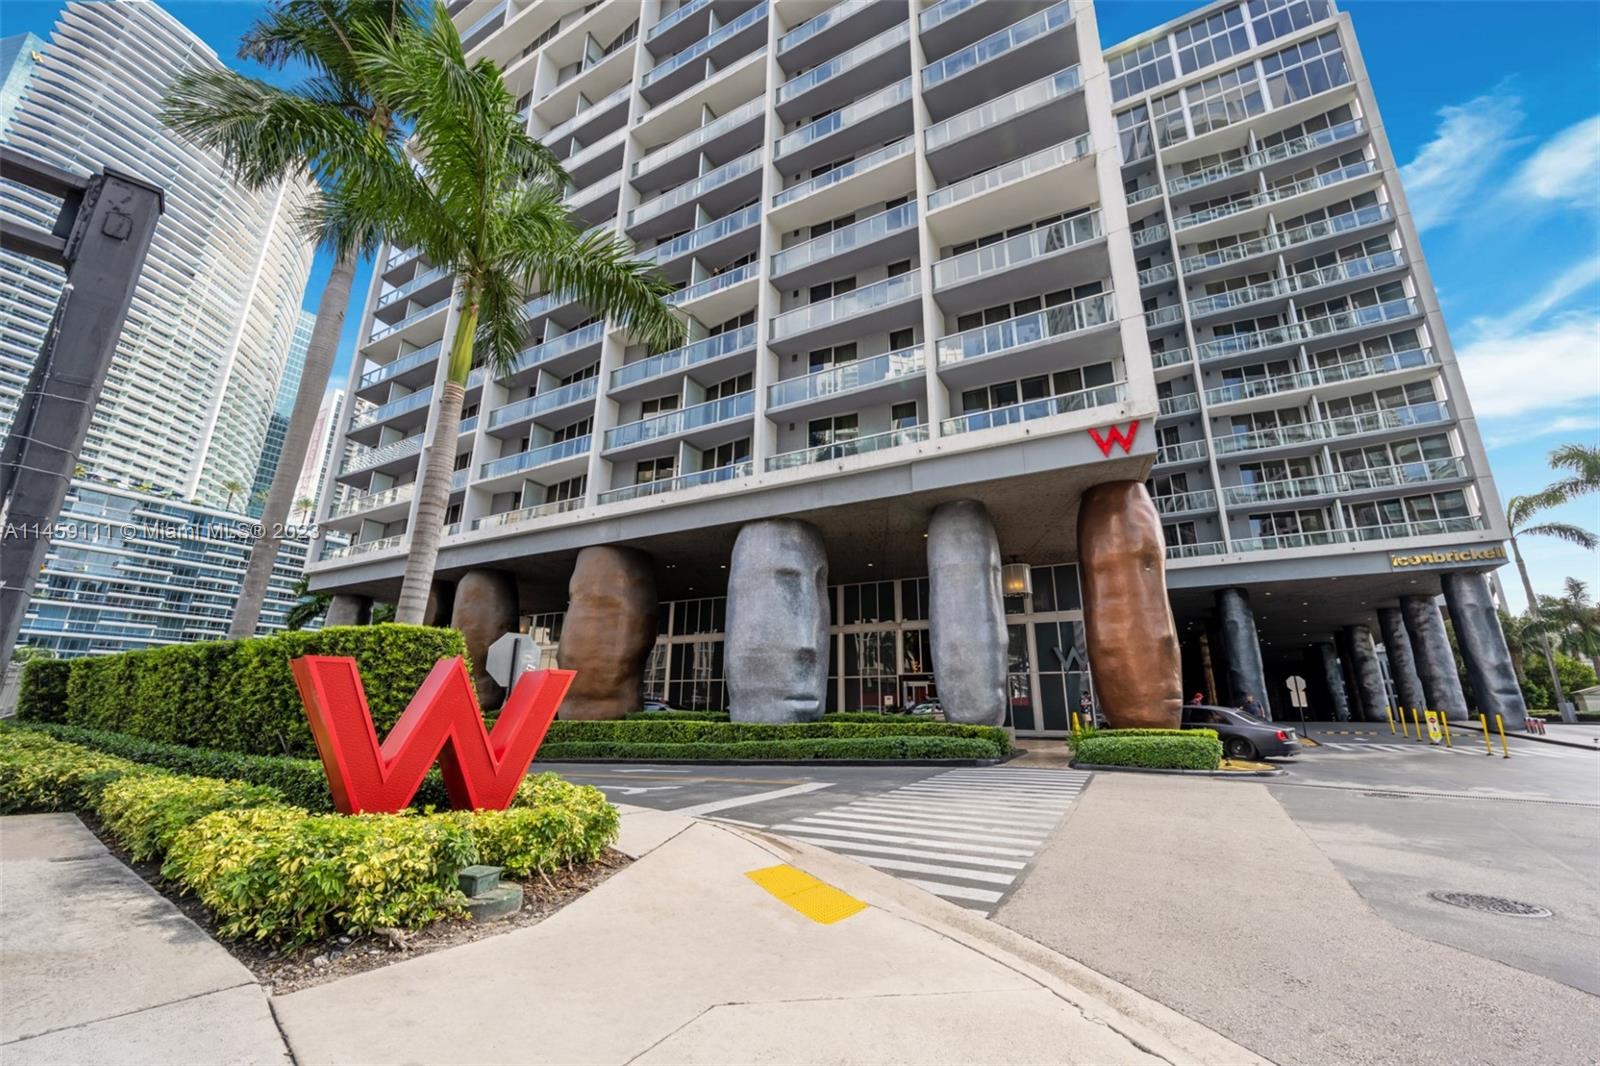 BROKERS BRING YOUR CLIENTS AND EARN COMMISSION!!!
PRICES VARY ON SEASONAL BASIS!!
SHORT-TERM RENTAL AND MONTHLY RENTAL ALLOWED. Enjoy Brickell living in this fully remodeled 2 bedroom (1 BR + Den) Open kitchen, dining, and living room with High-end furniture; and custom closets at the "W Hotel ". Take in views of Miami as you dine on international cuisine ADDIKT, Italian fine-dining restaurant Cipriani, and Mexican cuisine restaurant Cantina La Veinte. Resort Style Amenities feature a 300-foot-long swimming pool, a 28,000-square-foot spa and fitness center, a 50-person hot tub, a café with poolside food and beverage service, 24-hour concierge service, 24-hour valet parking service, and much more.